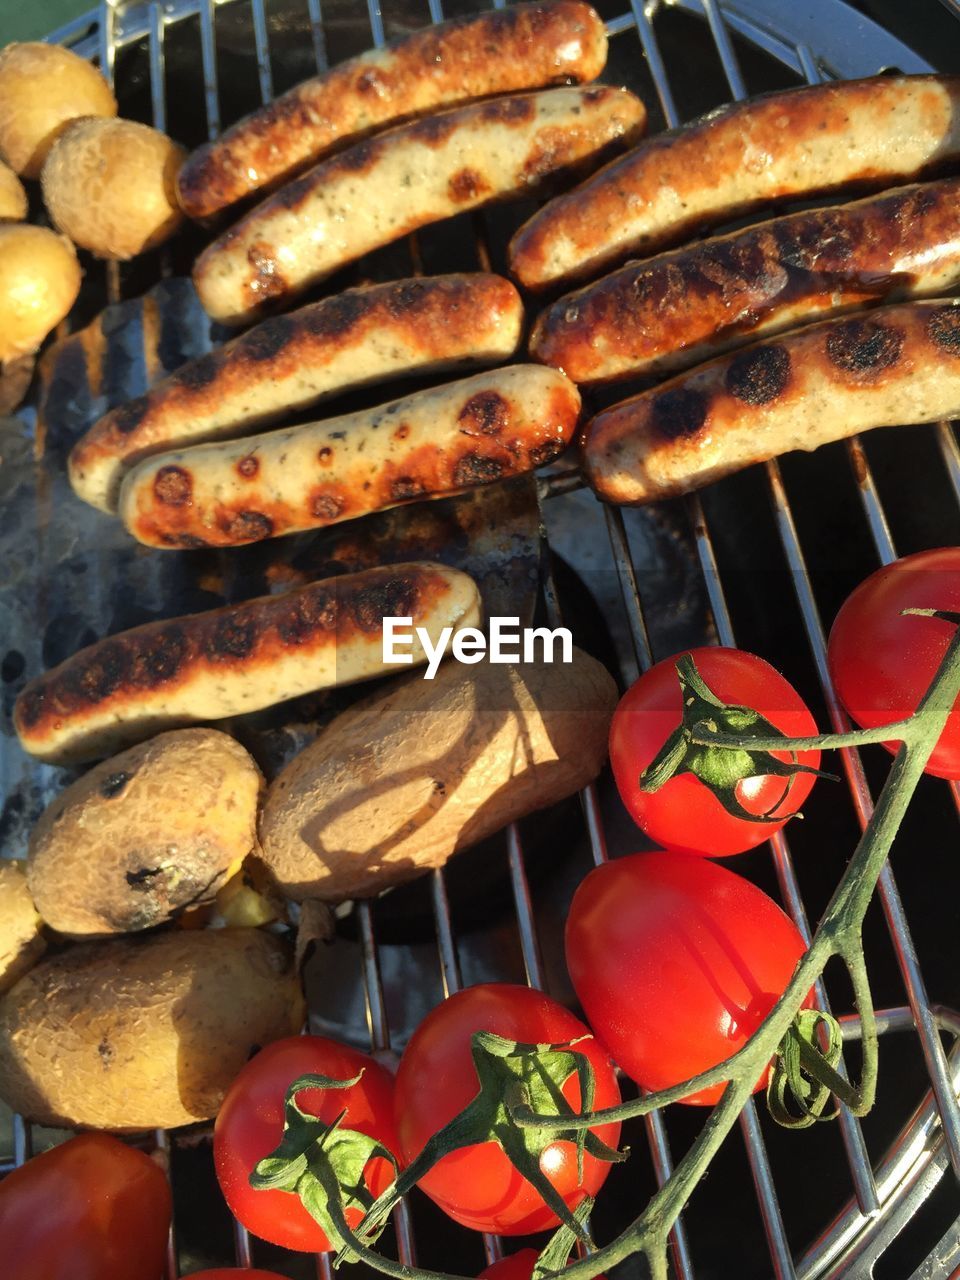 FULL FRAME SHOT OF SAUSAGES ON BARBECUE